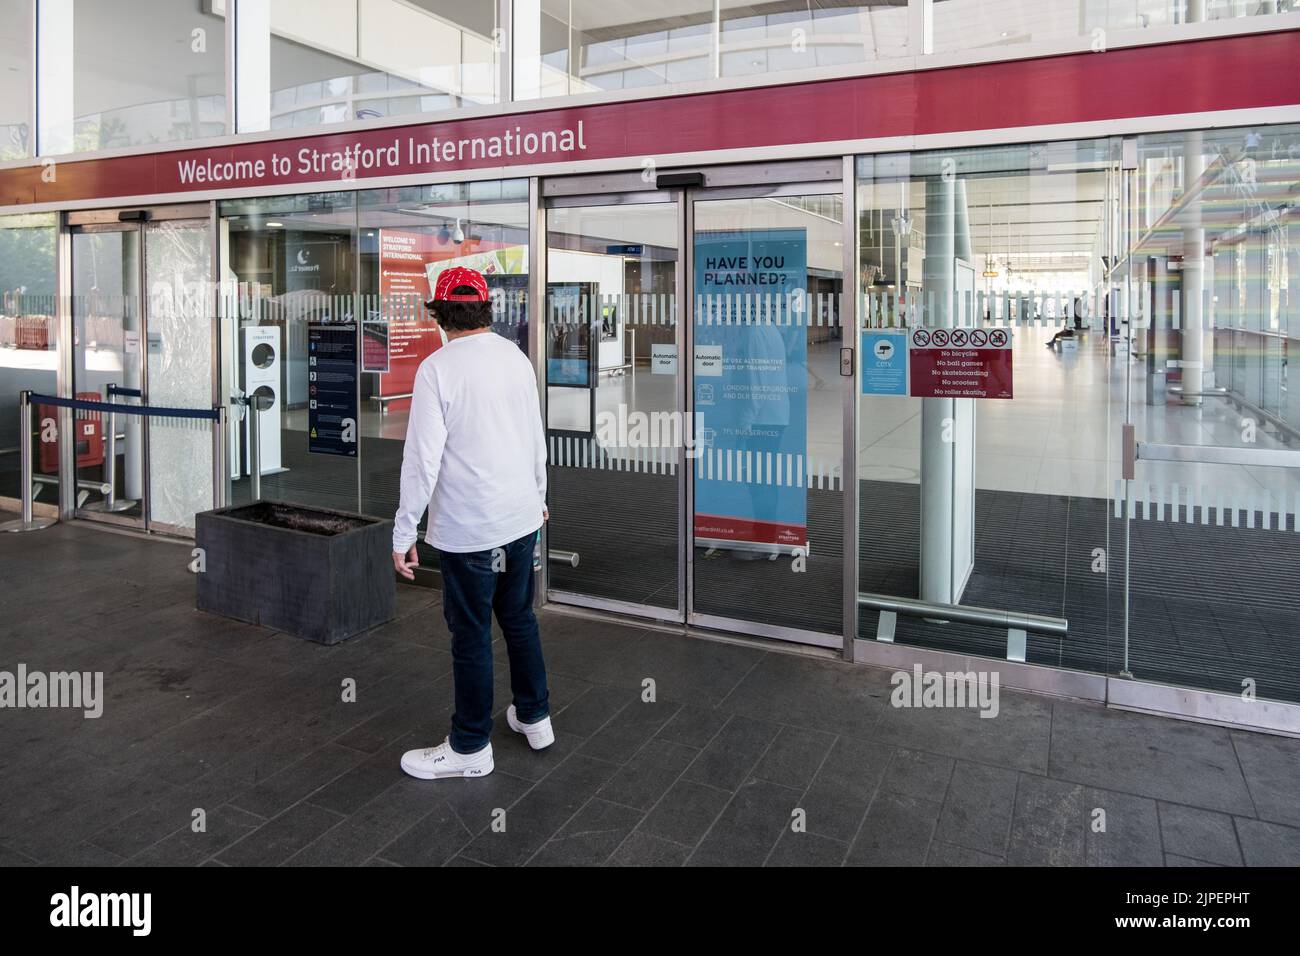 Customer stands outside Stratford International unable to enter during London Rail Strikes, Summer 2022. Stock Photo